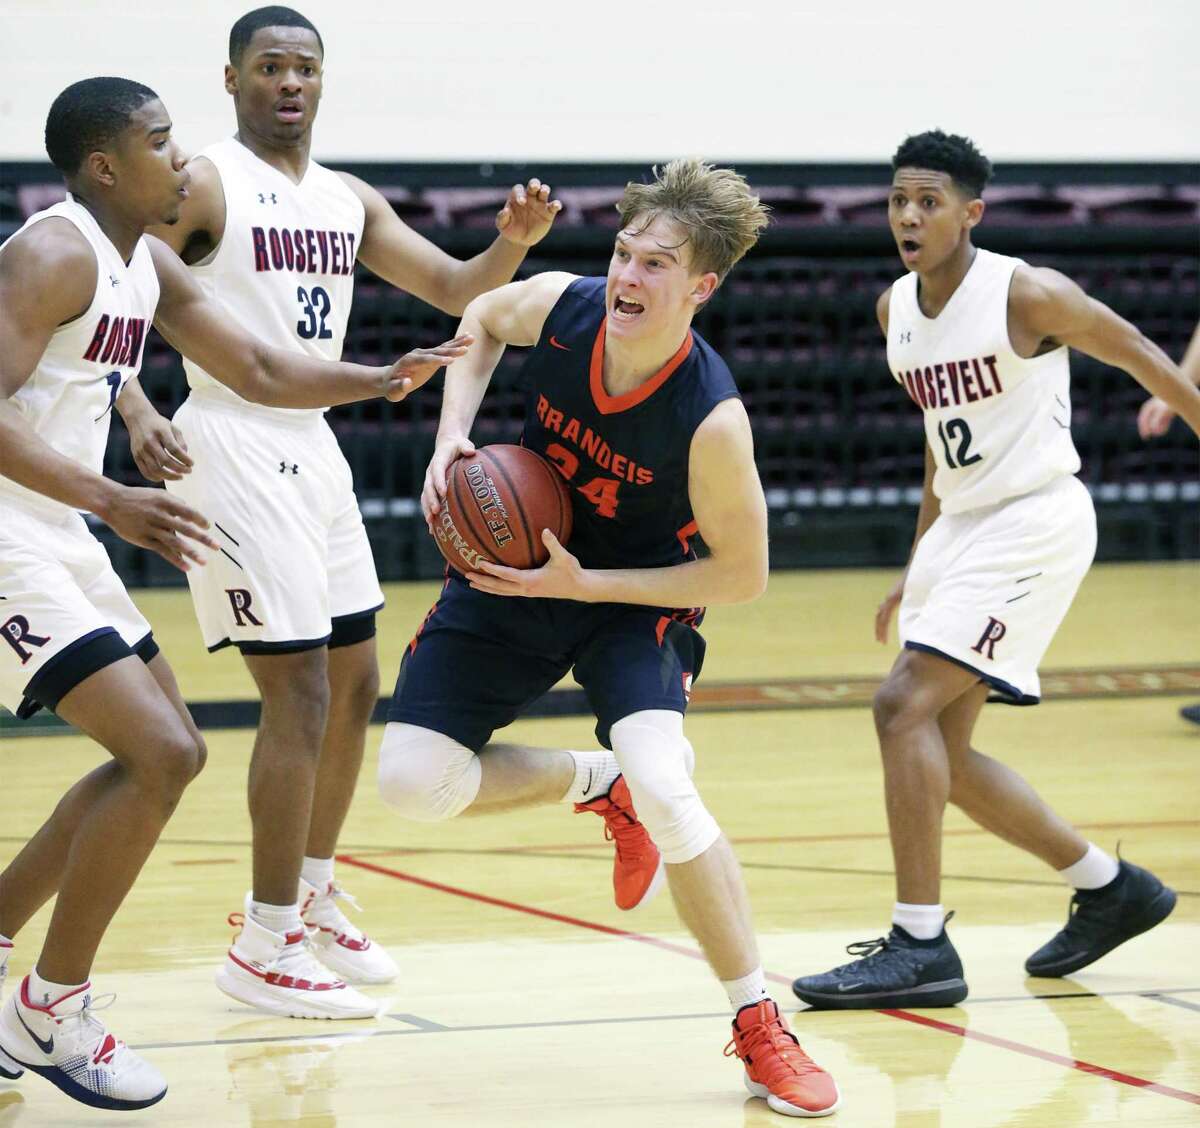 Kyle Schraeder splits a trio of defnders and gets to the lane for the Broncos as Roosevelt plays Brandeis in boys high school basketball playoffs at Littleton Gym on February 19, 2019.